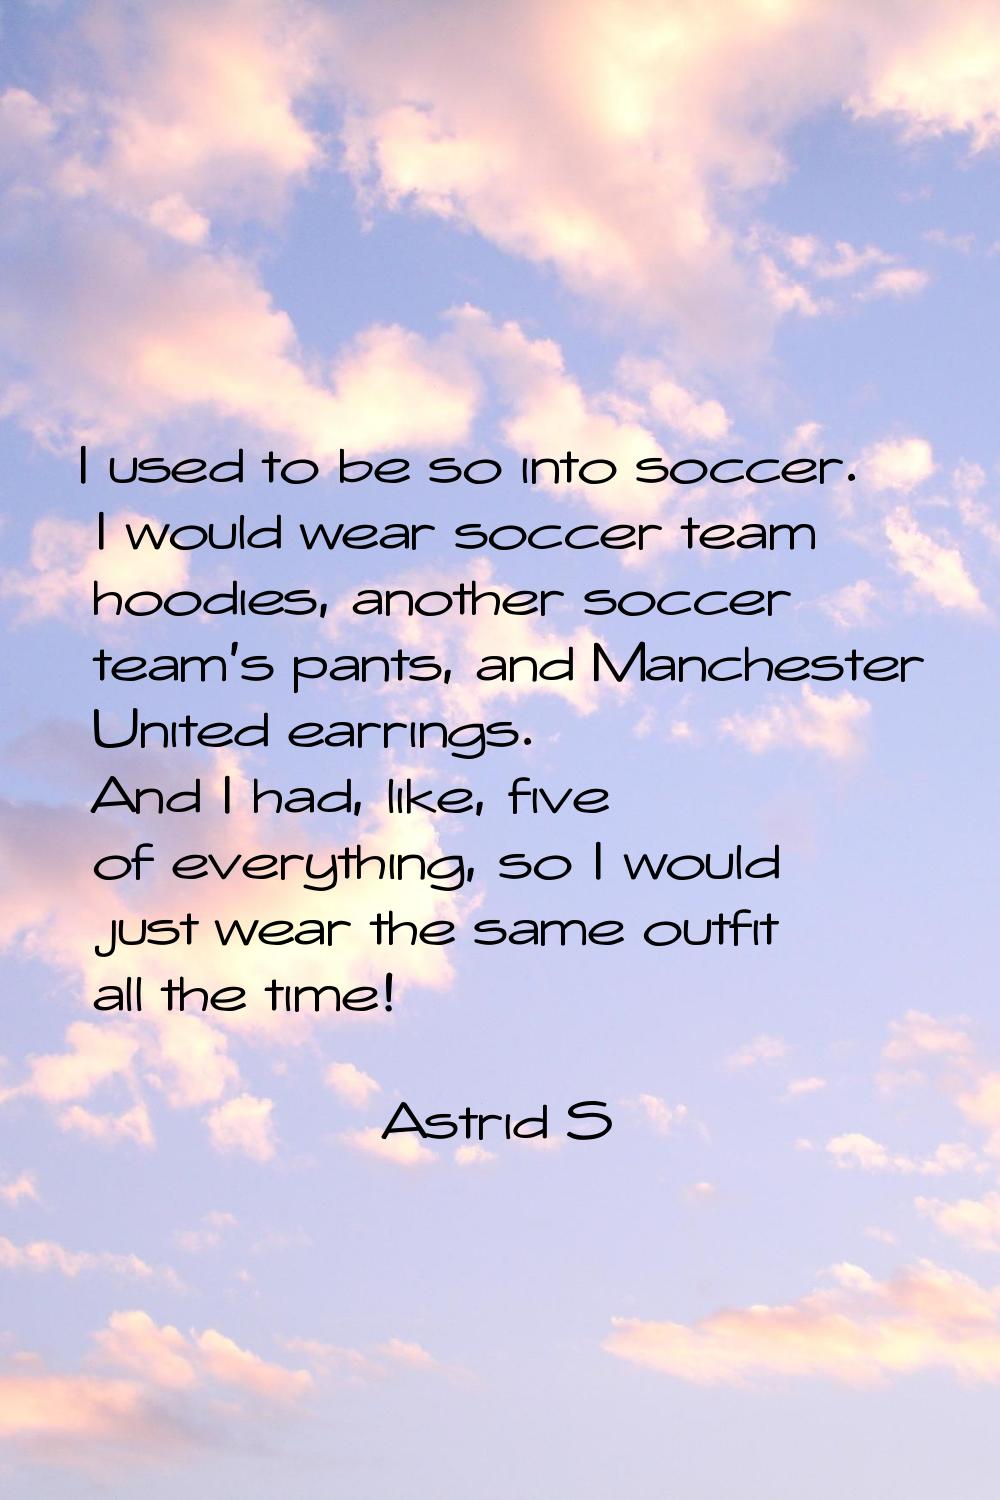 I used to be so into soccer. I would wear soccer team hoodies, another soccer team's pants, and Man